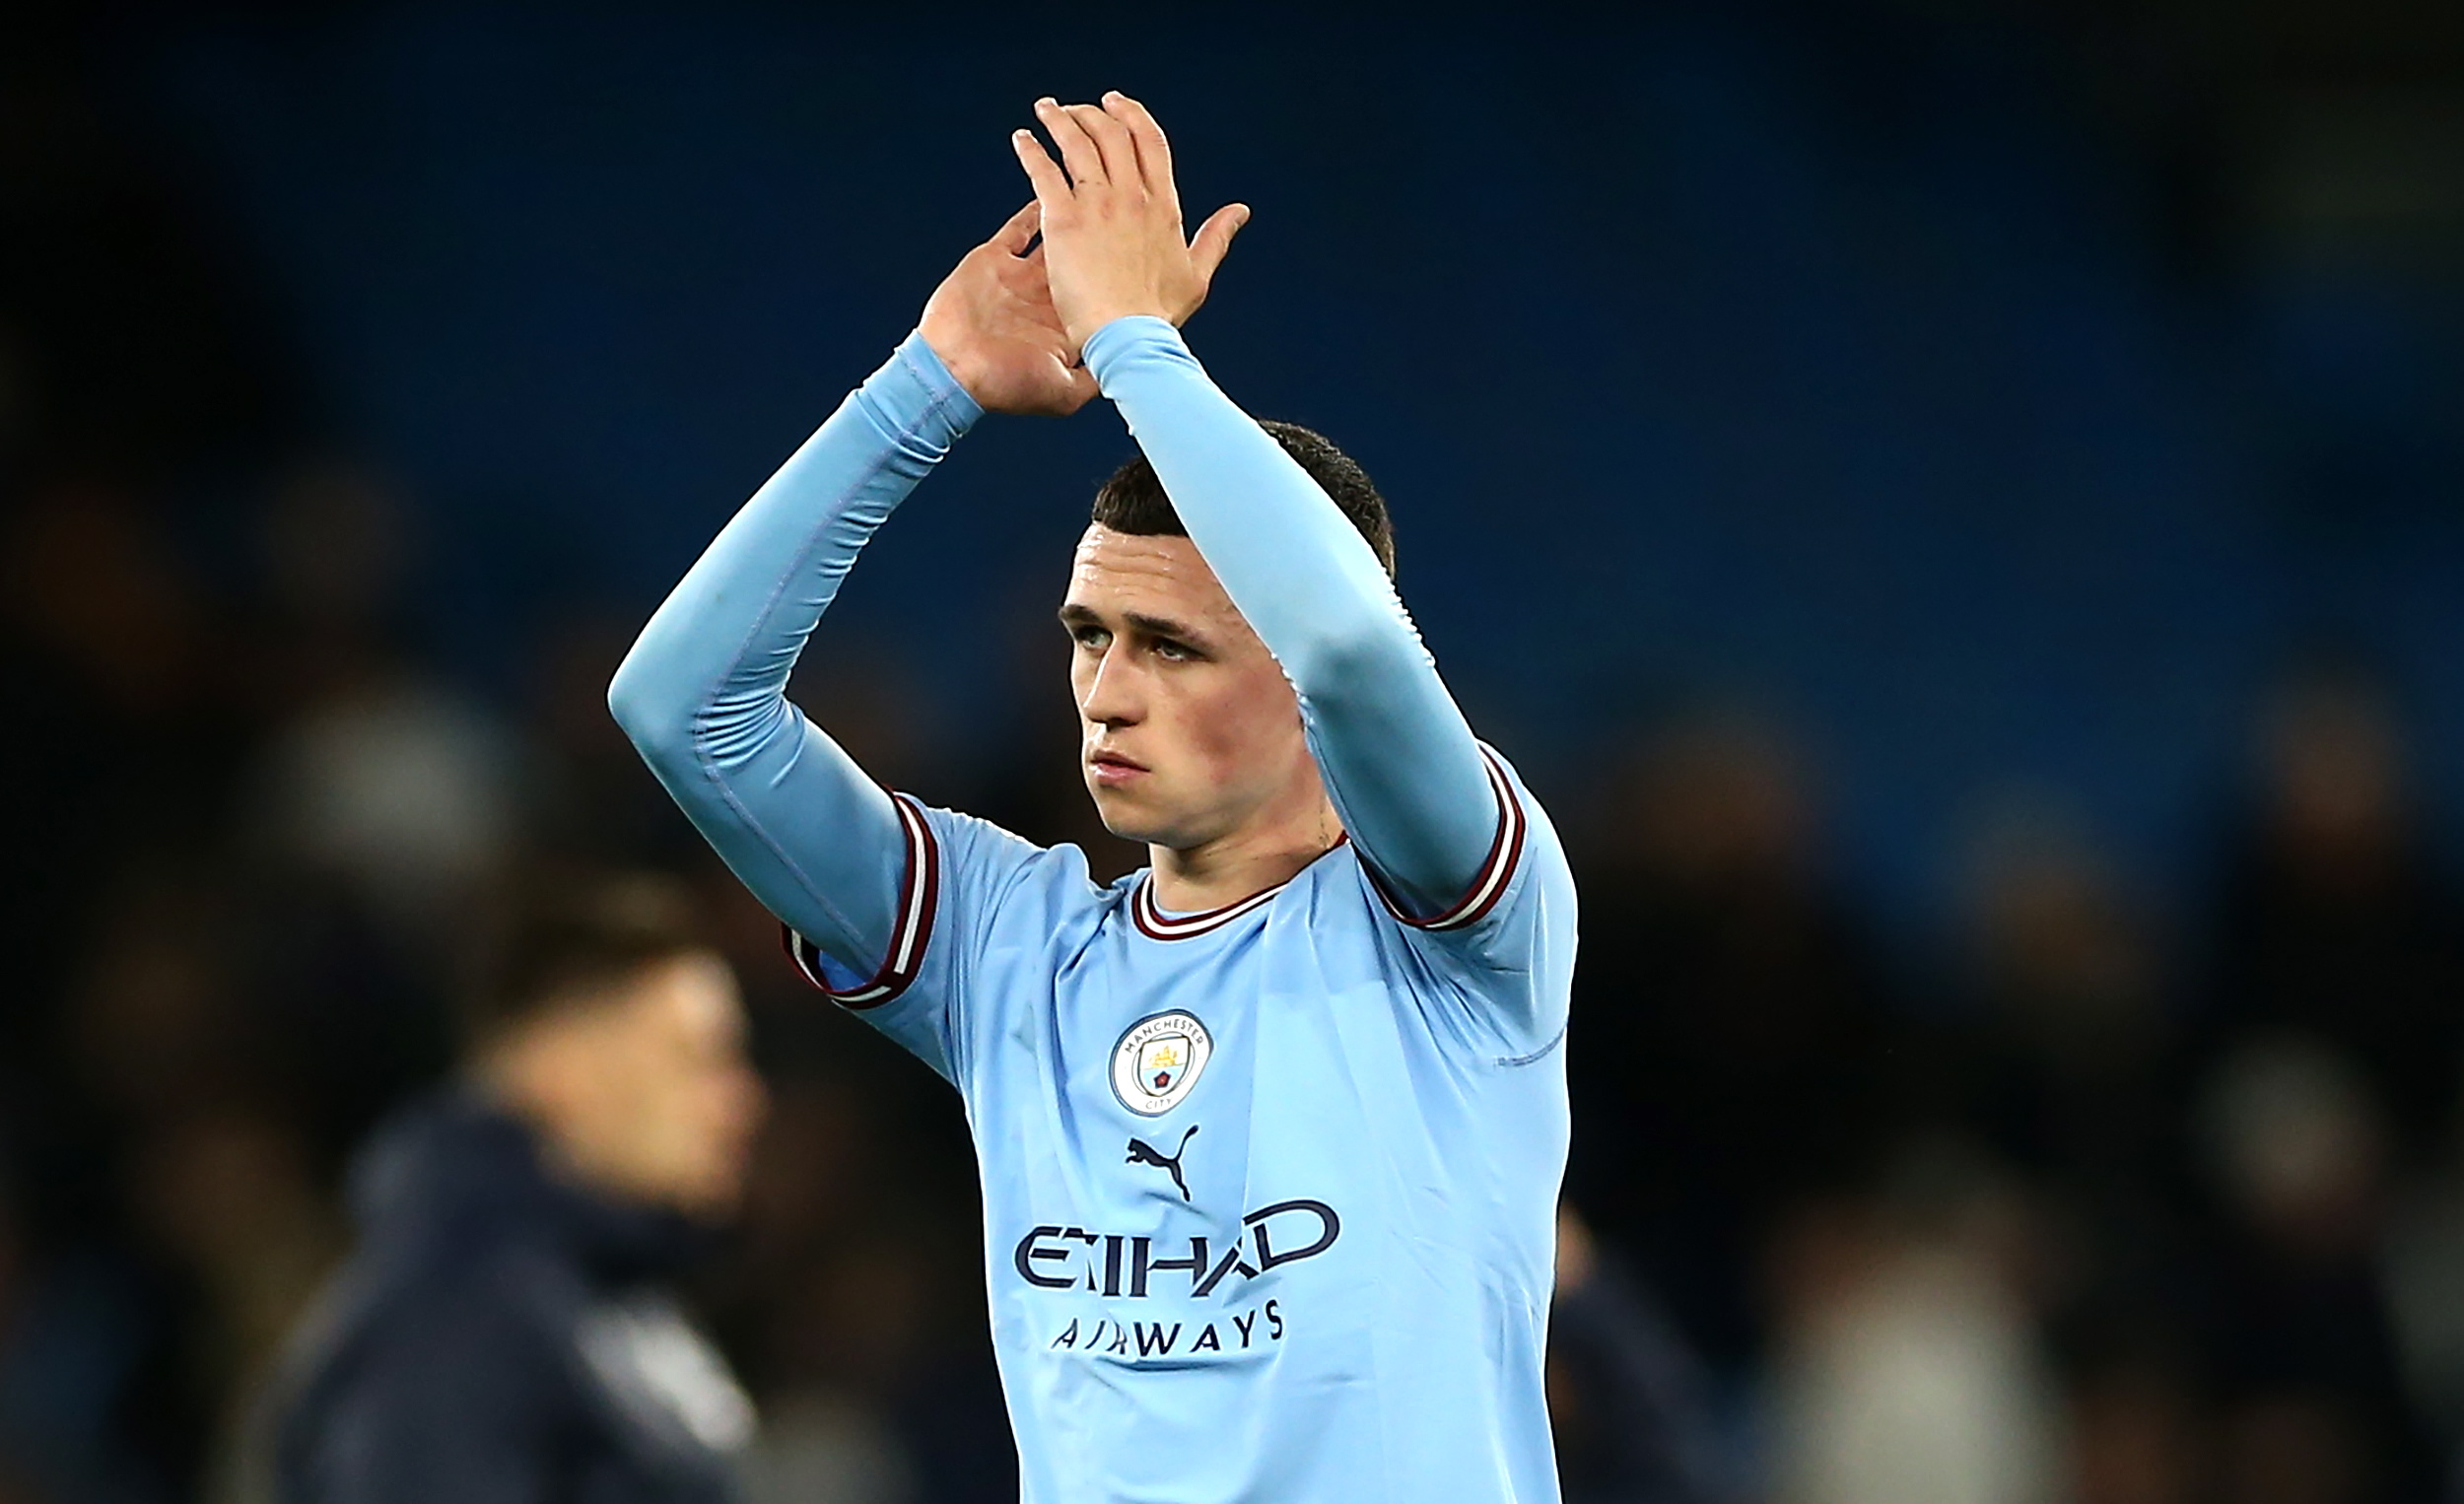 Foden feels confident heading into Champions League semifinal